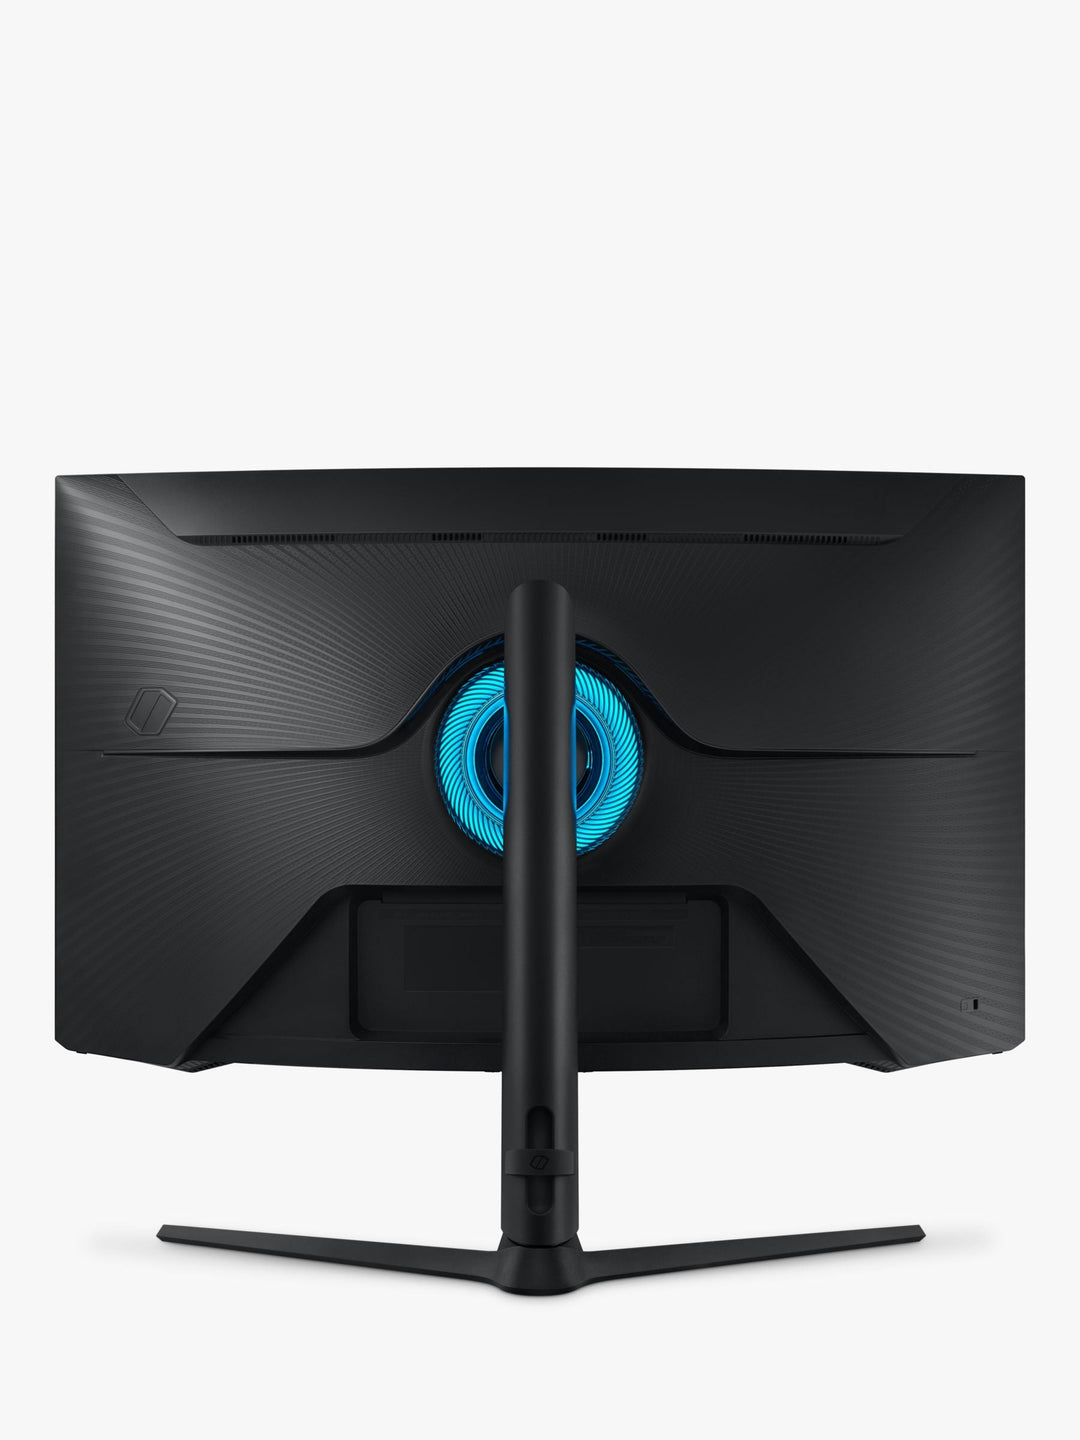 'Samsung Odyssey Neo G7 32" Curved Gaming Monitor 4K UHD, Quantum HDR 2000, 165Hz, 1ms, FreeSync Pro'